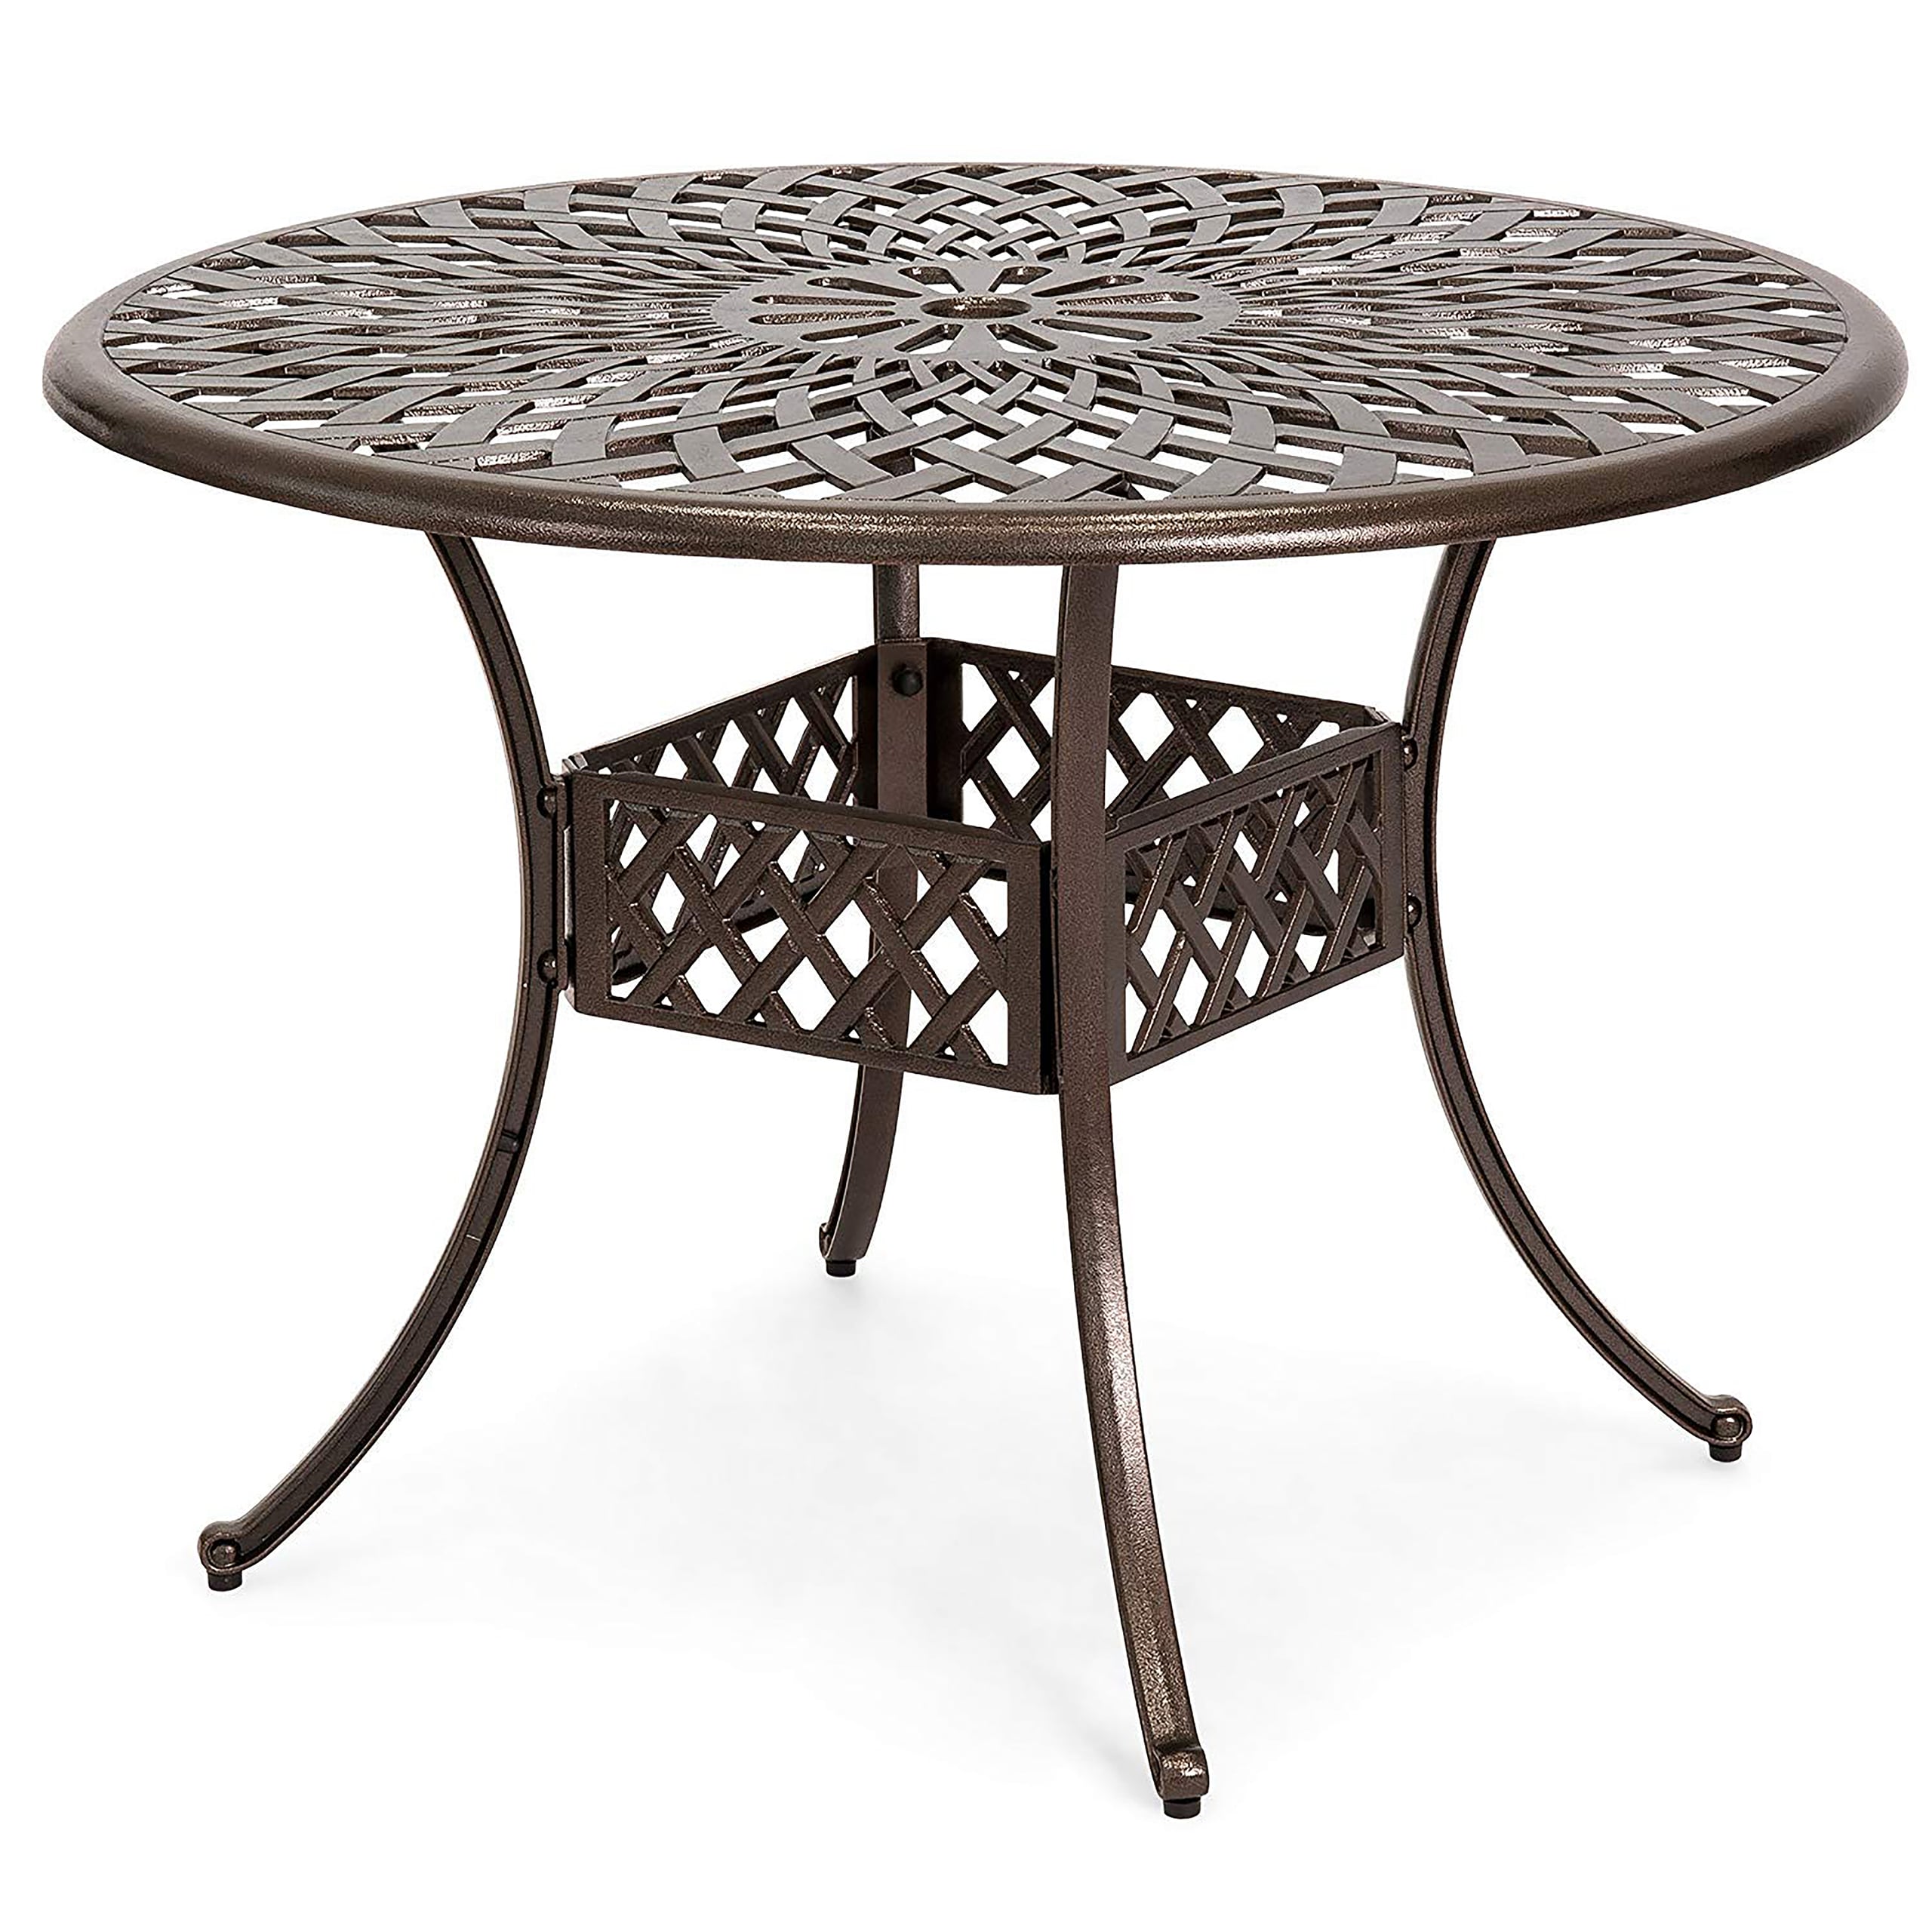 Kinger Home Arden Round Outdoor Dining Table 41-in W x 41-in L with ...